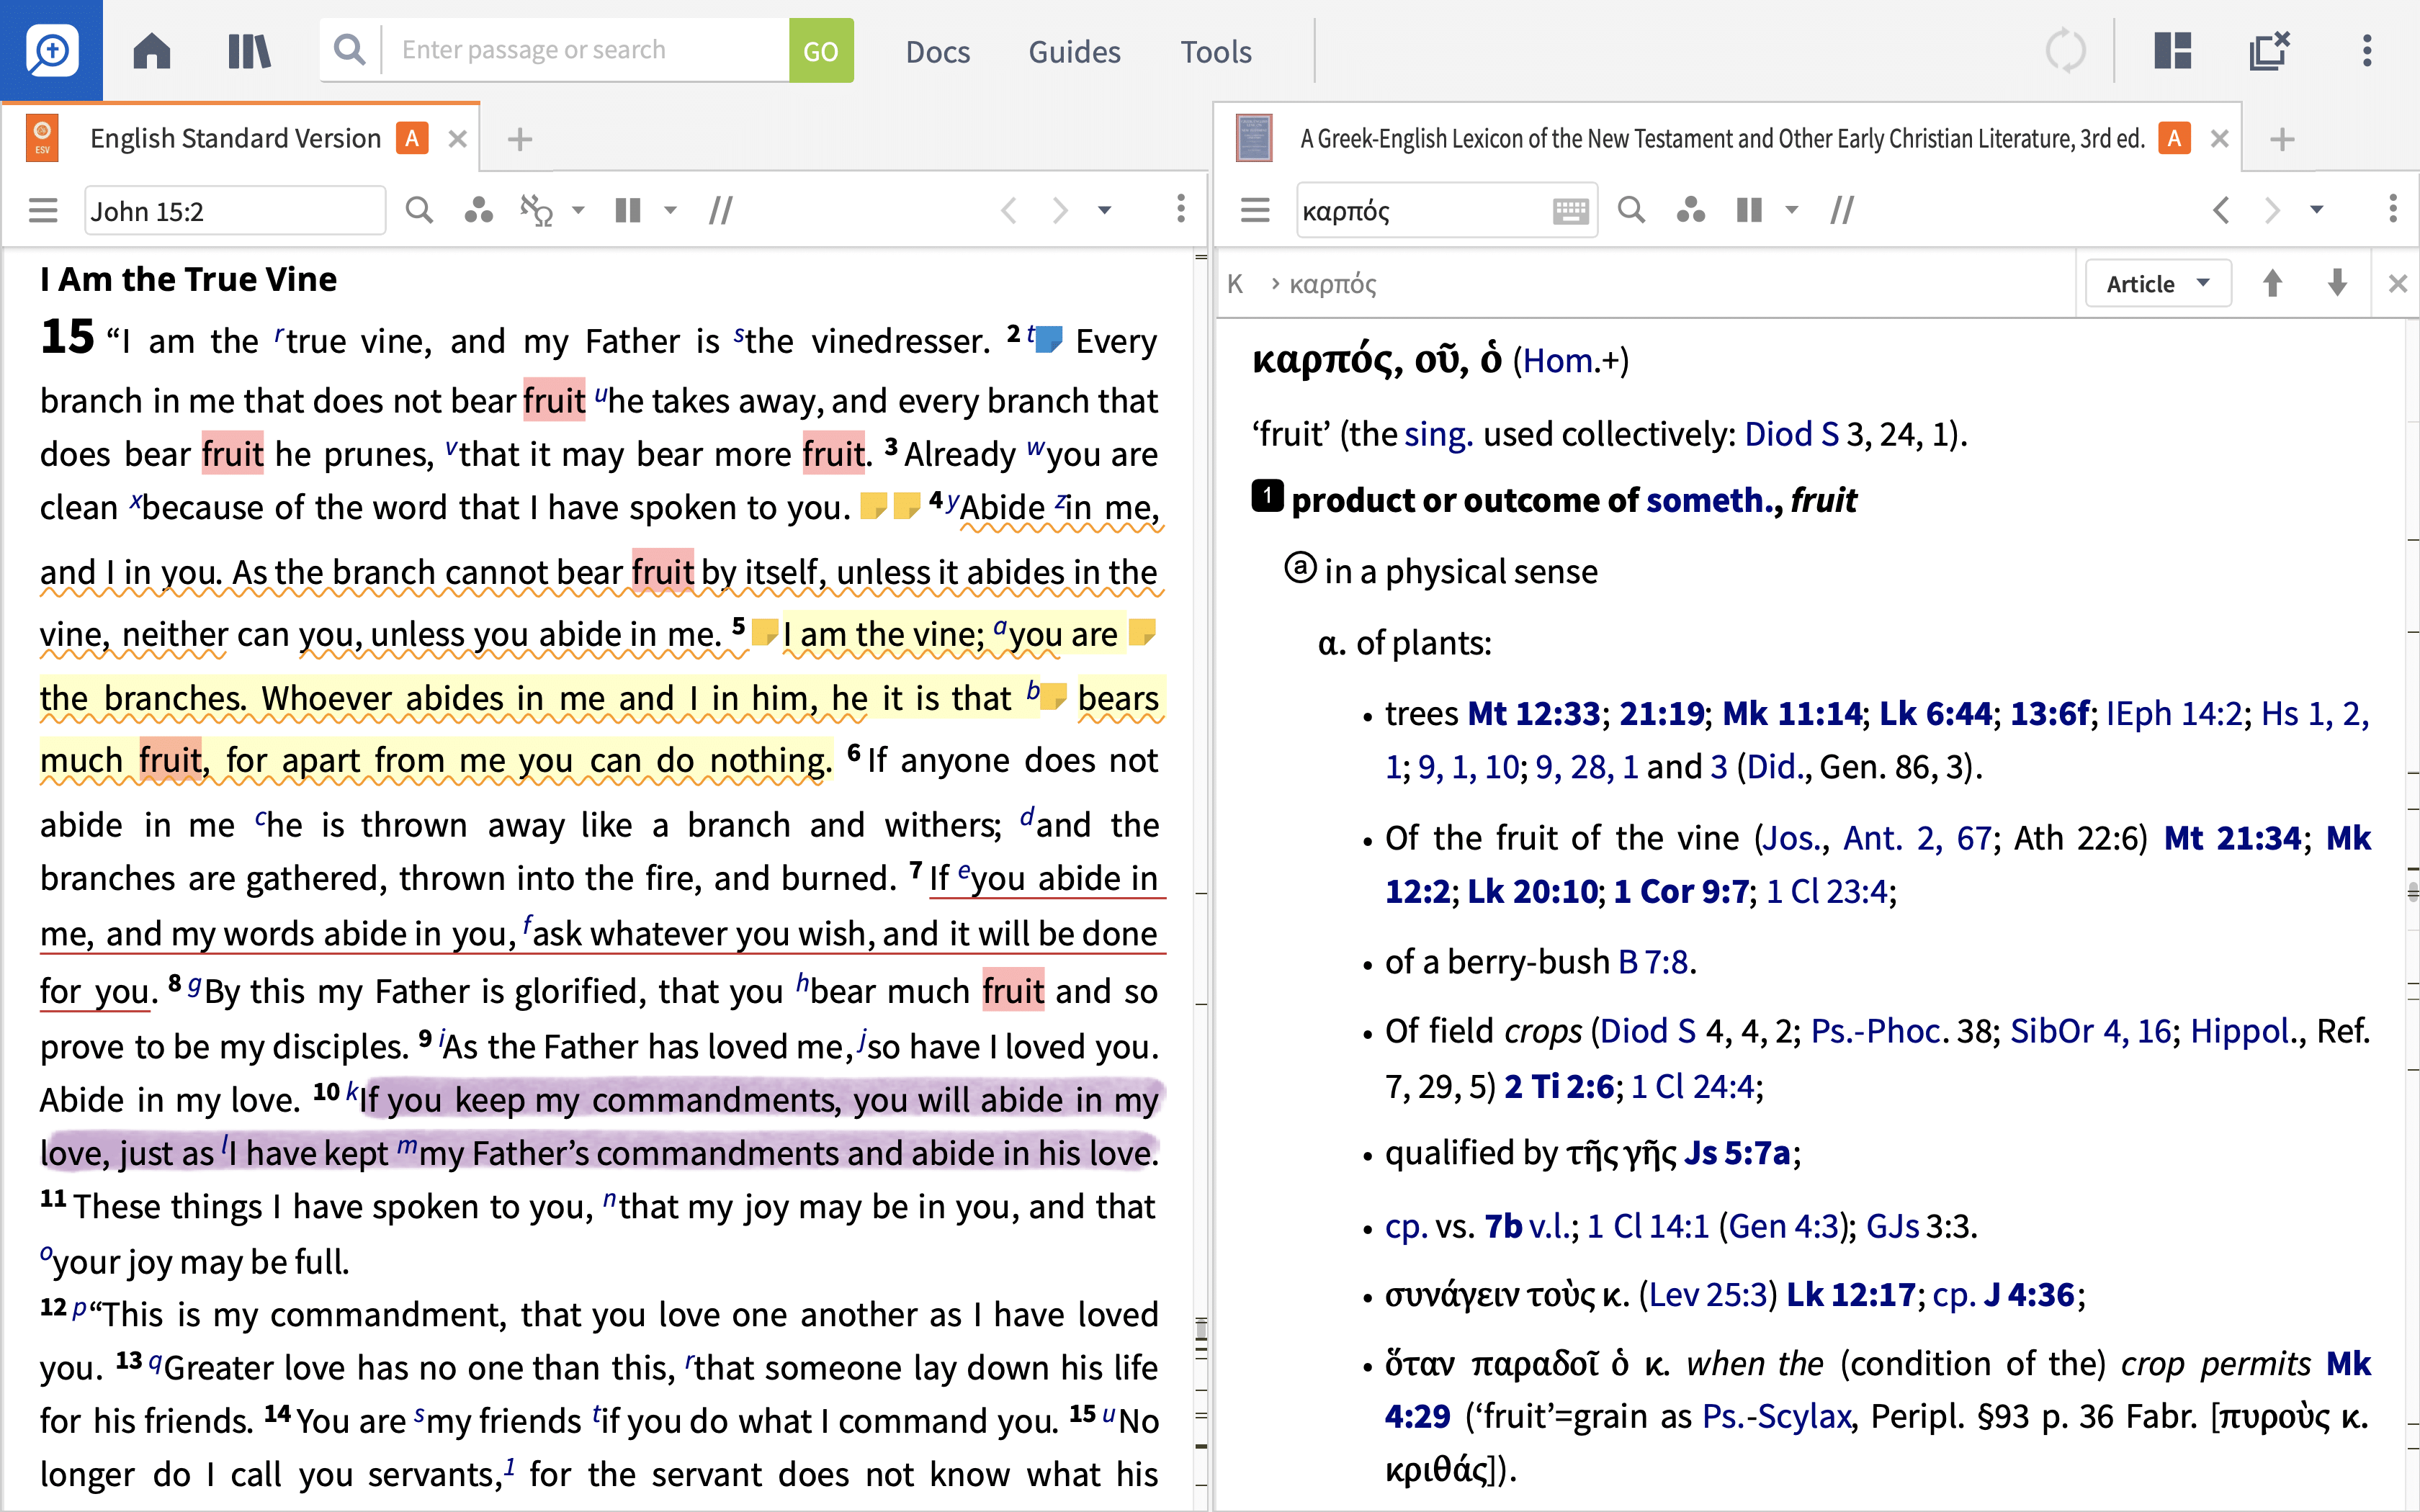 Logos desktop software is open on a computer. There are two panes open: the one on the left has the English Standard Version open to John 15:2. The pane on the right side is open to A Greek-English Lexicon of the New Testament and Other Early Christian Literature, 3rd ed. They are studying the word ’fruit.’